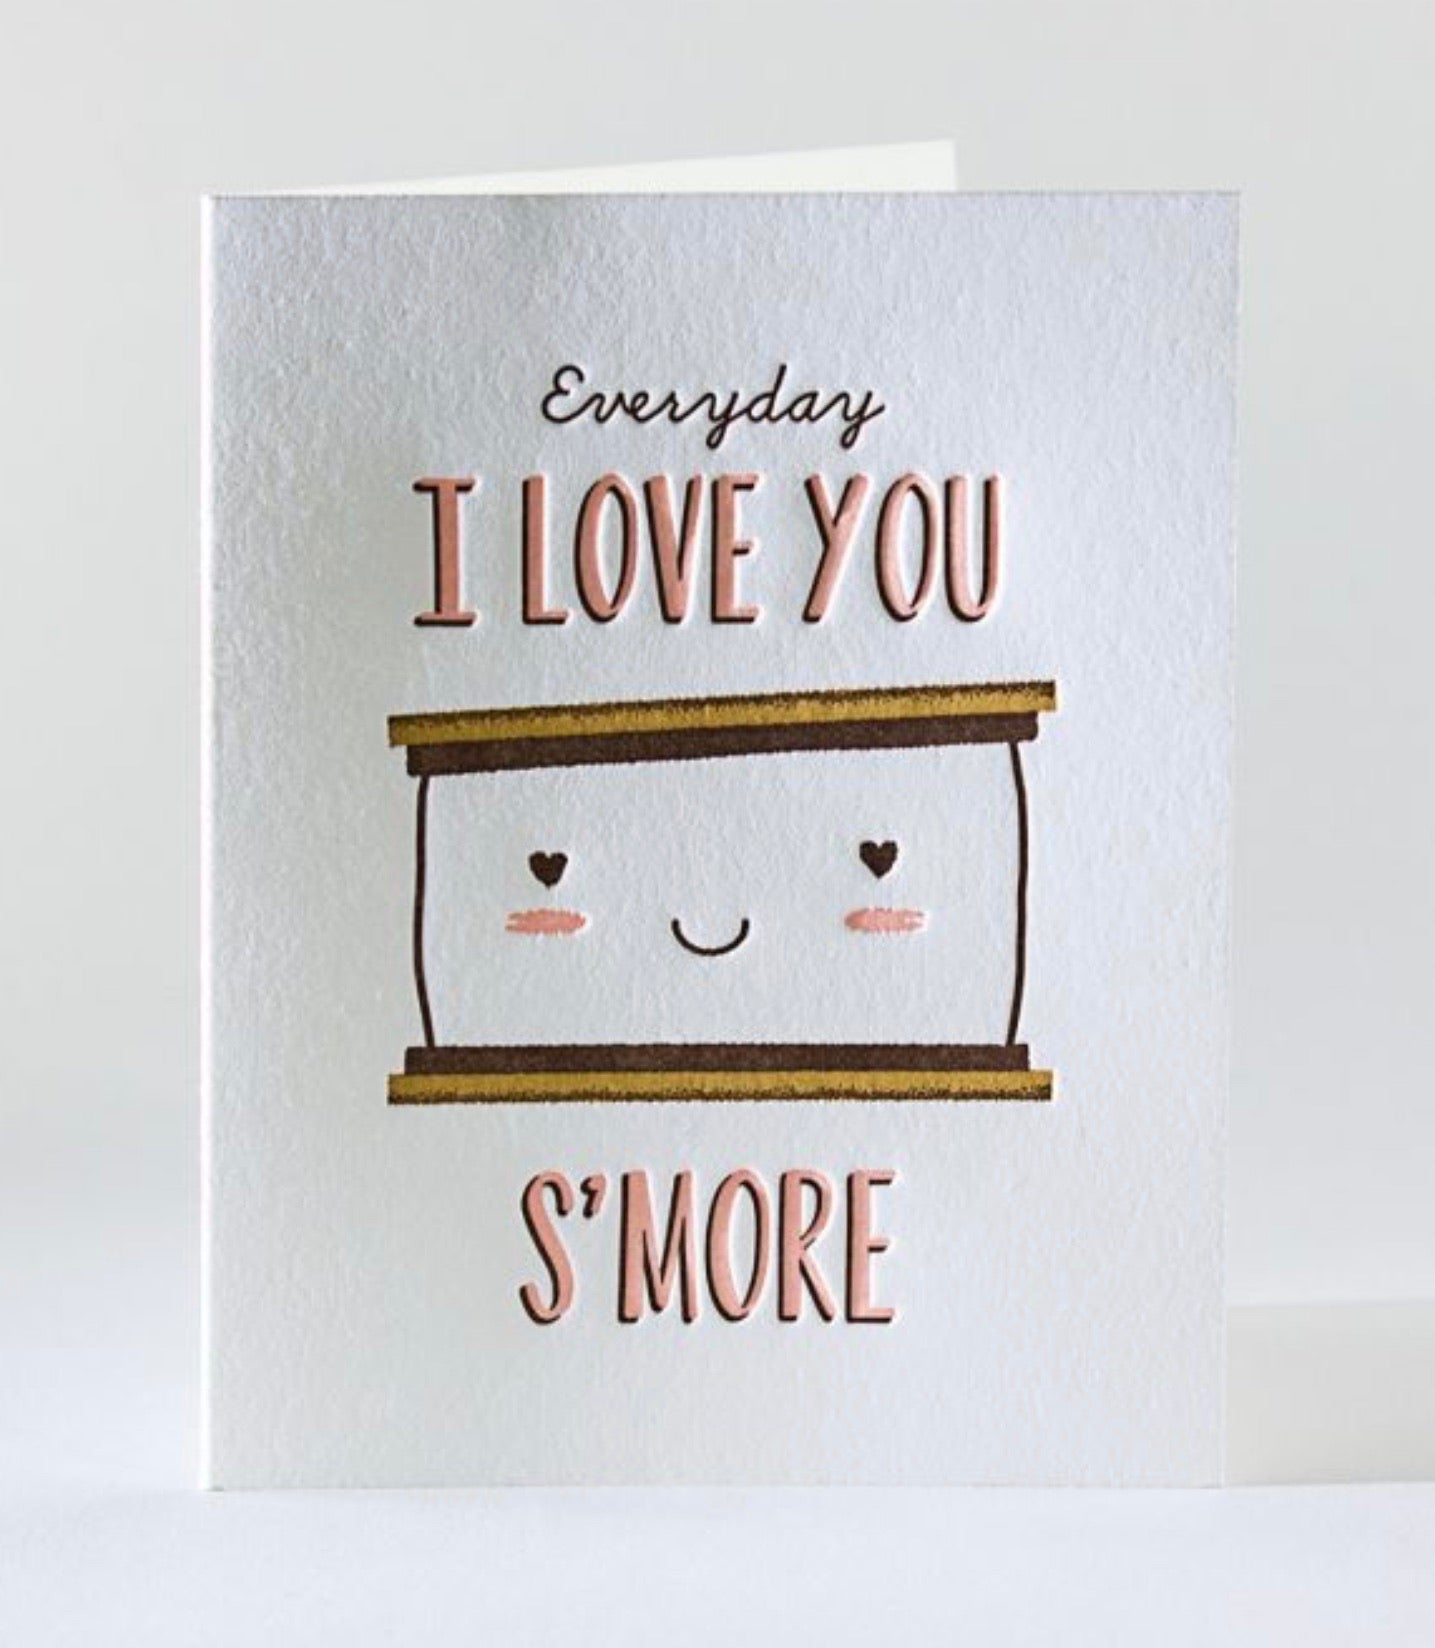 Love you S’more!